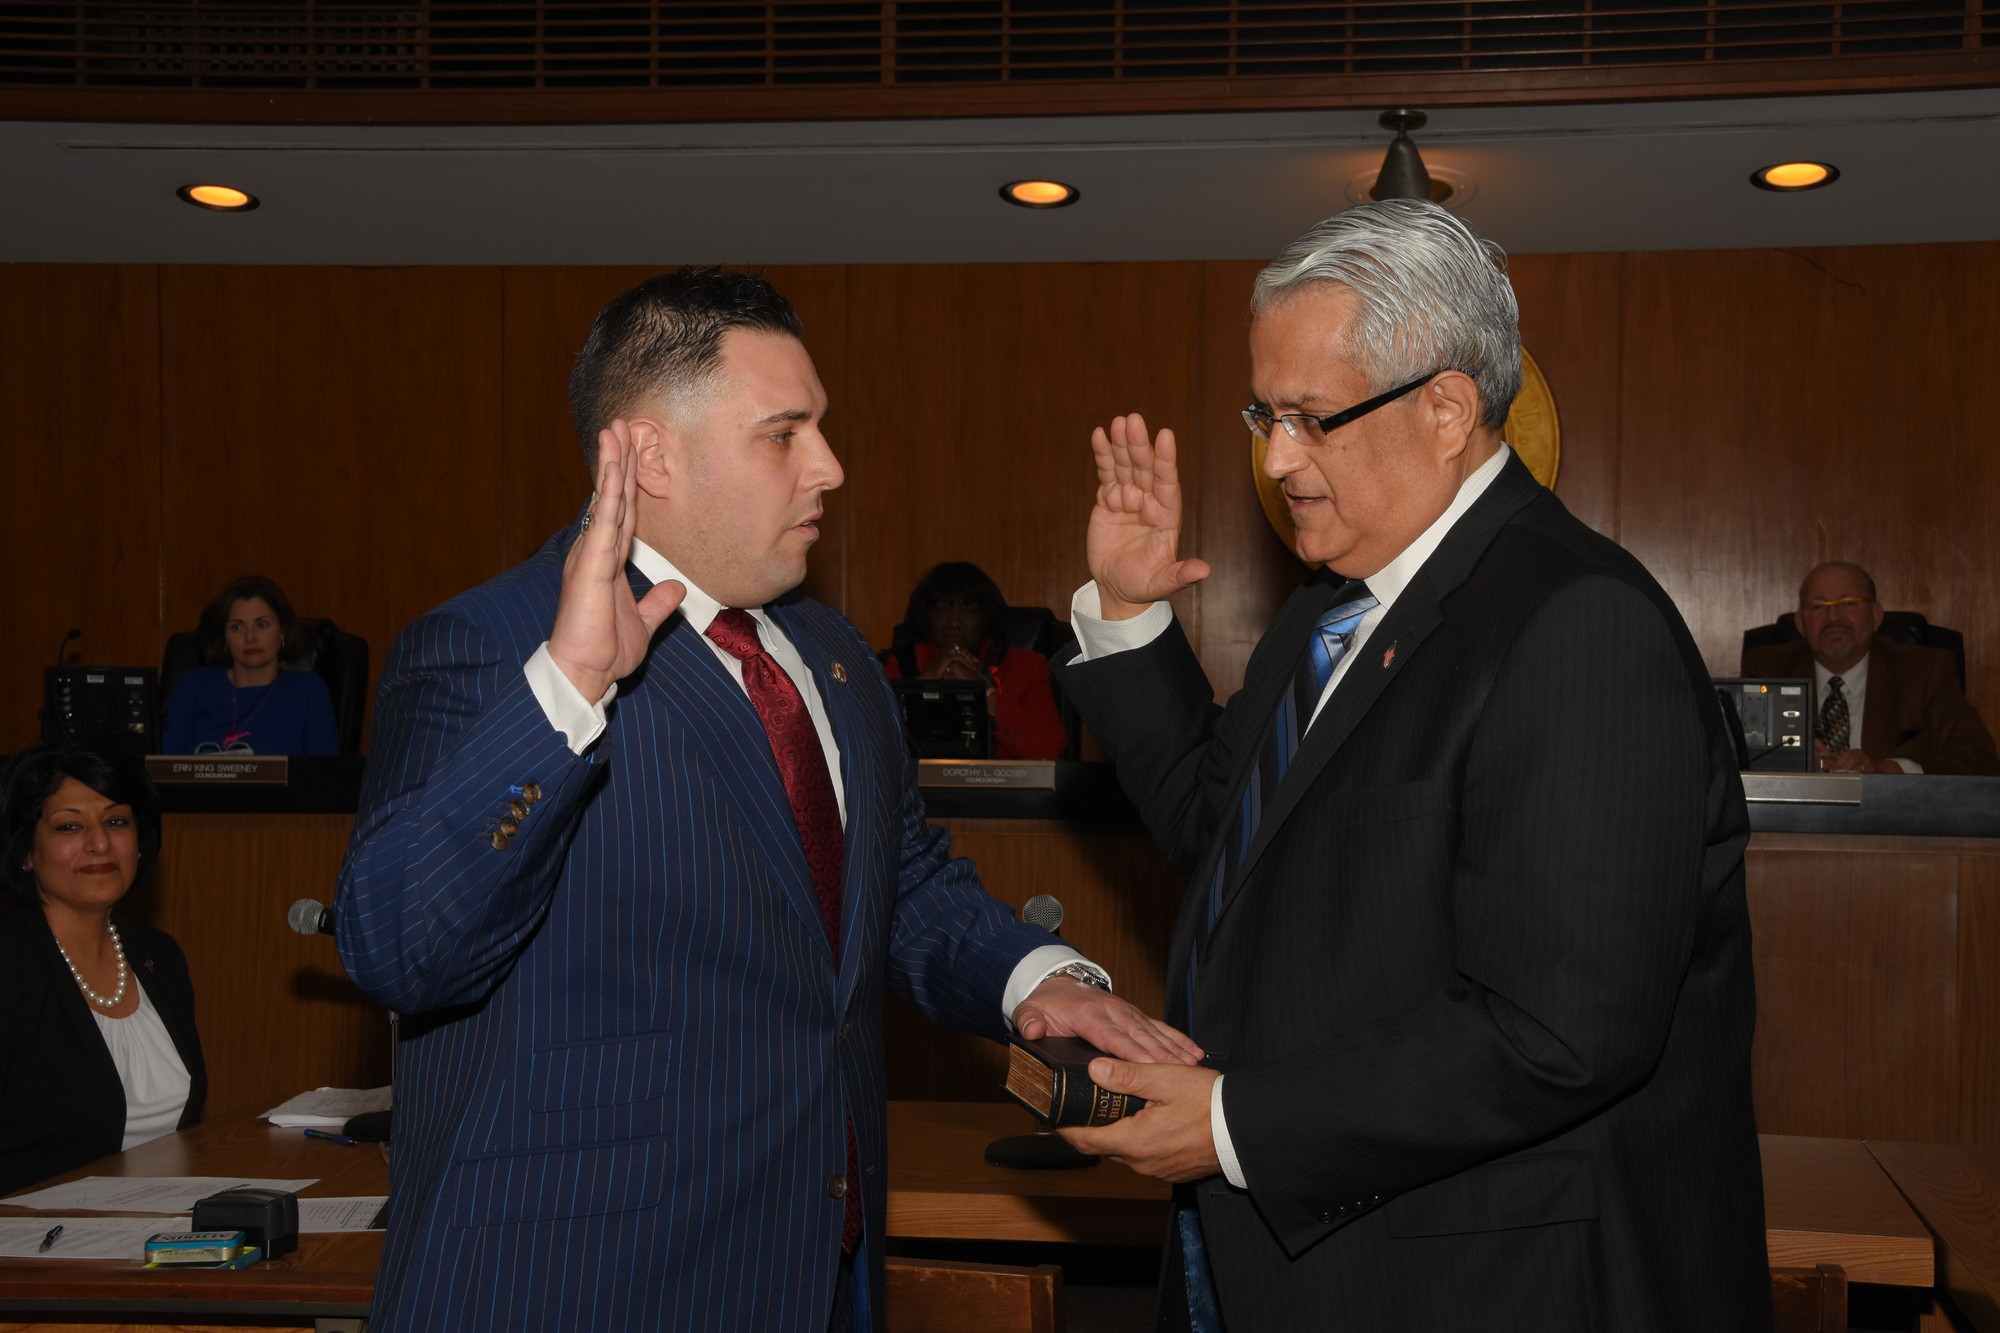 Anthony P. D’Esposito, of Island Park, was appointed to the 4th Councilmatic District by the Hempstead Town Board on Tuesday, filling the vacancy left by current Town Supervisor Anthony J. Santino.